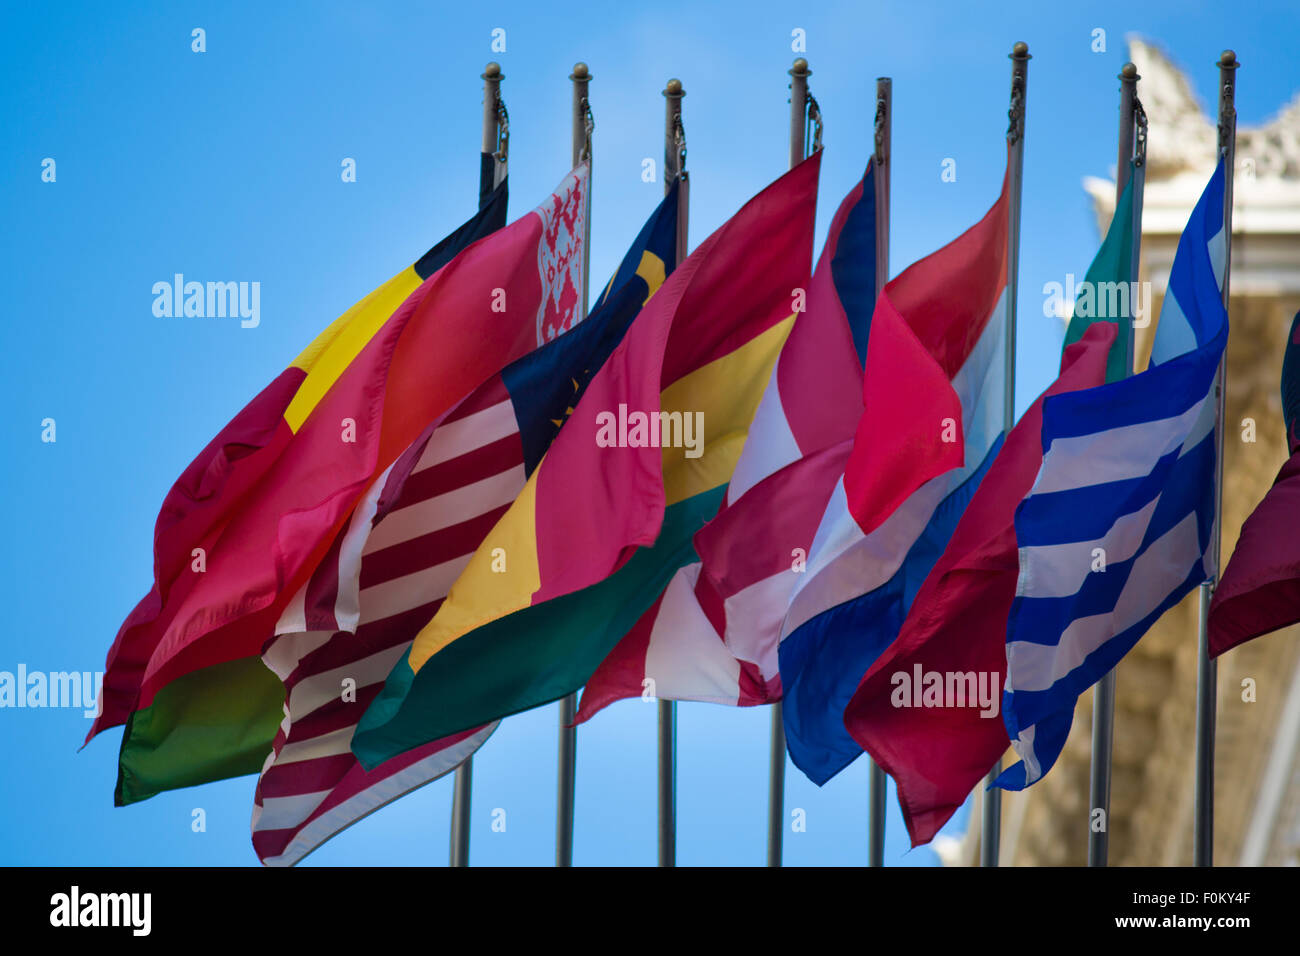 Group of flags of many different nations against blue sky Stock Photo